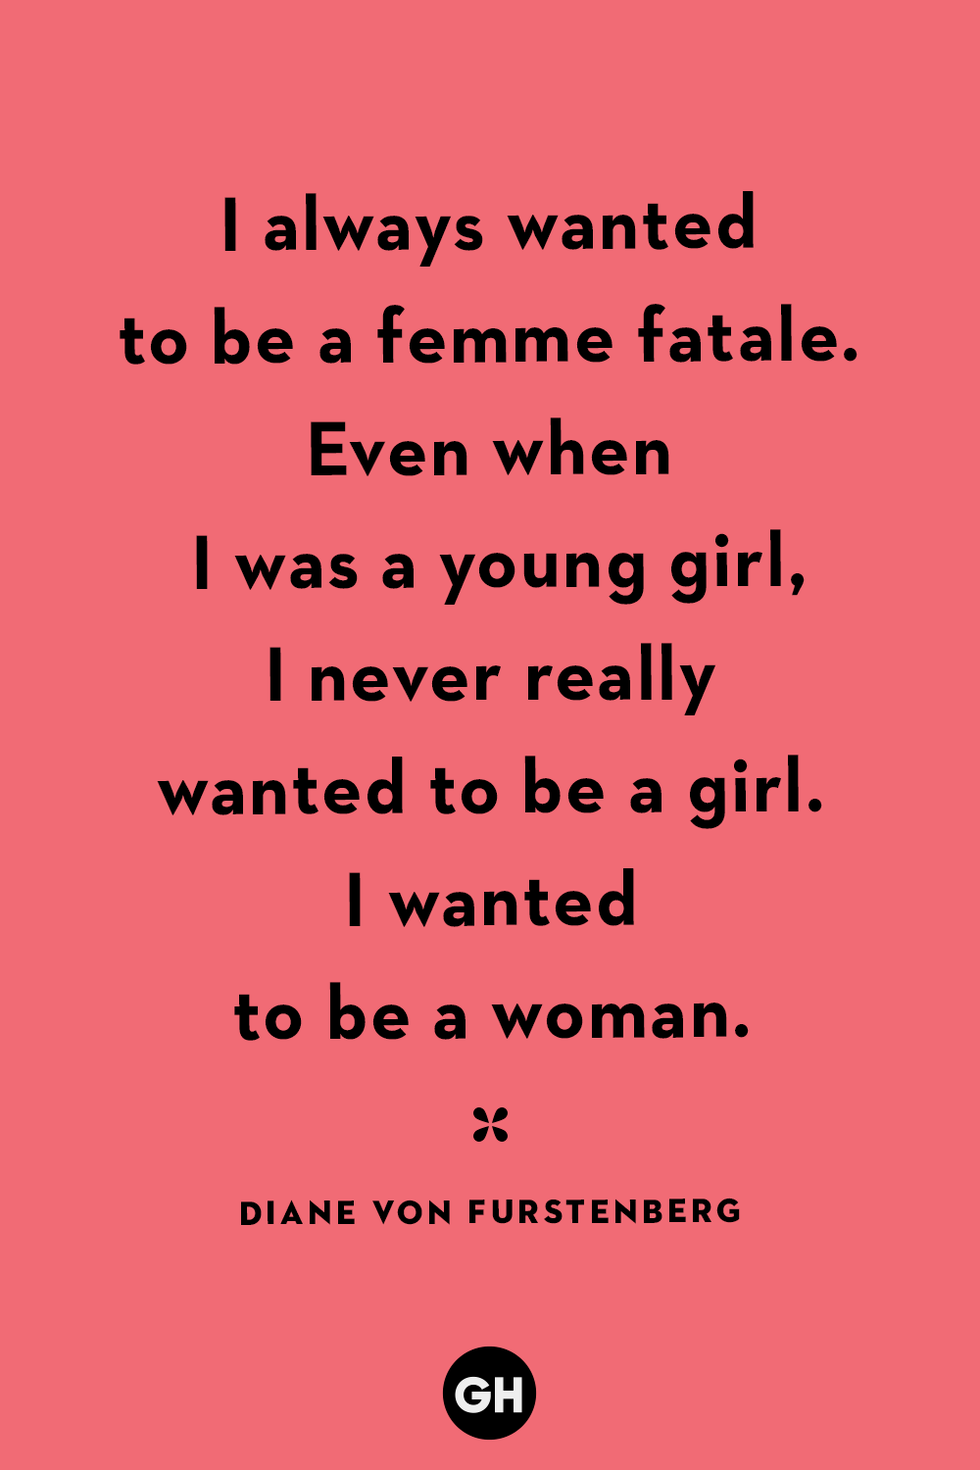 50 Best Strong Women Quotes - Powerful Sayings From Strong Women